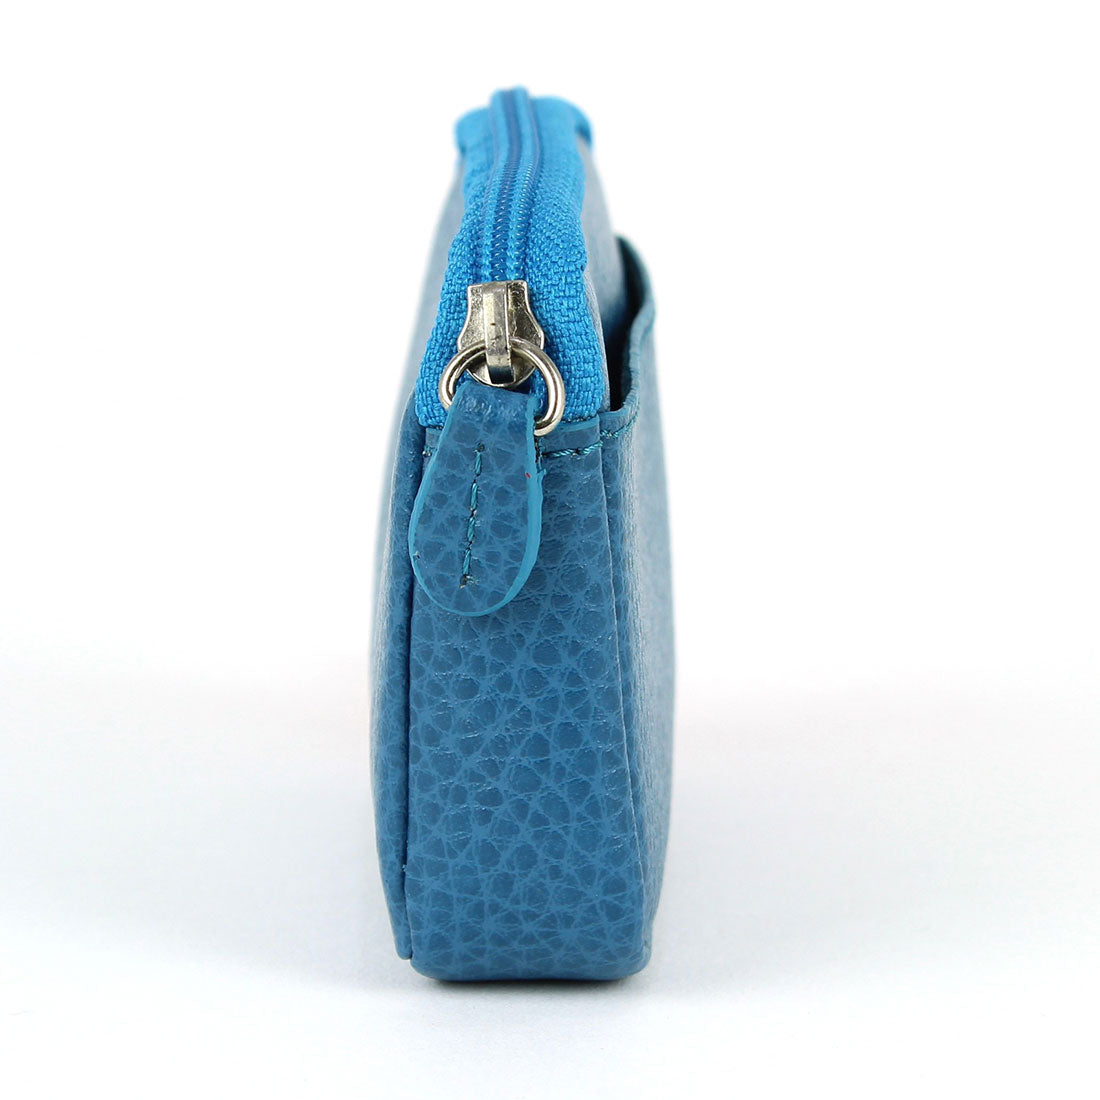 Small Wallet/Card Holder - Turquoise#colour_laurige-turquoise